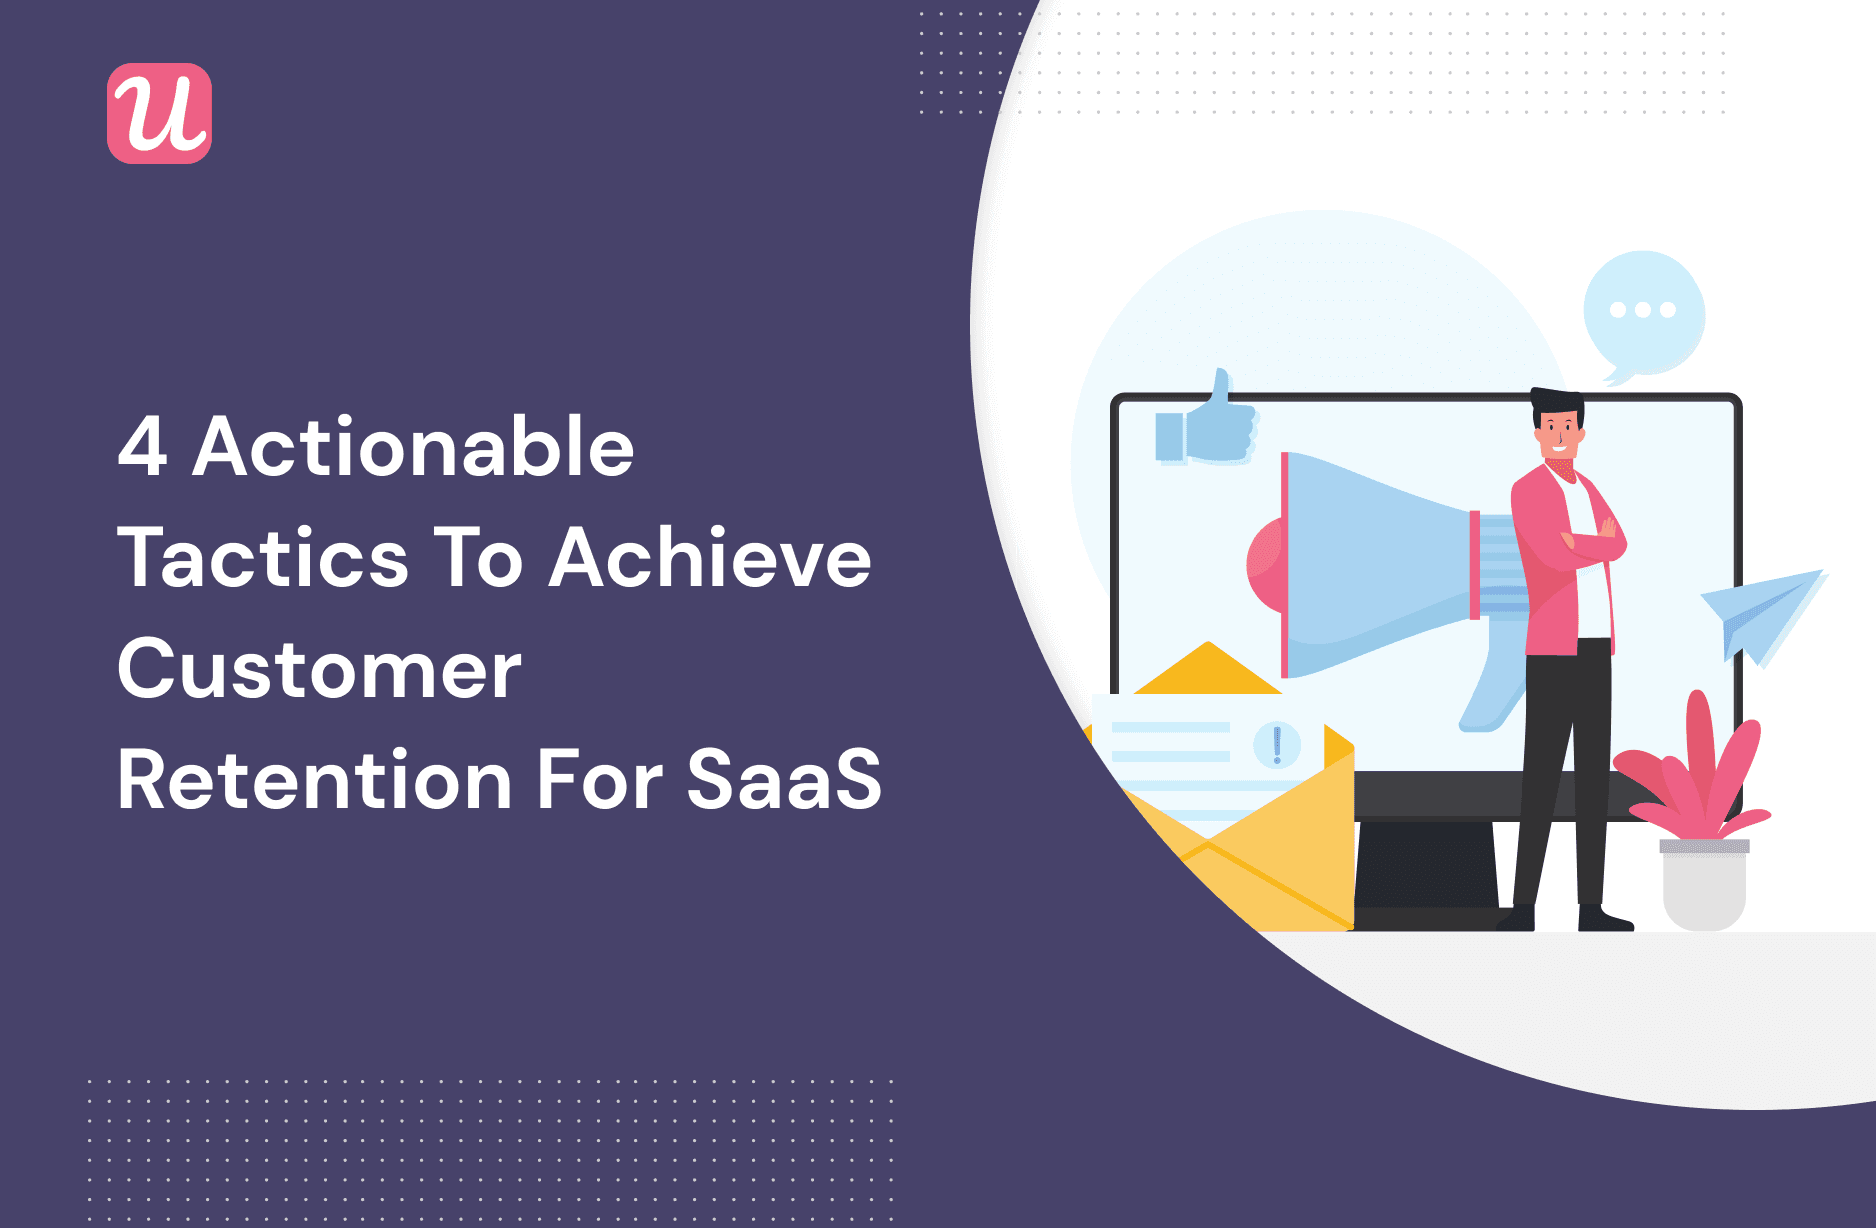 4 Actionable Tactics To Achieve Customer Retention For SaaS